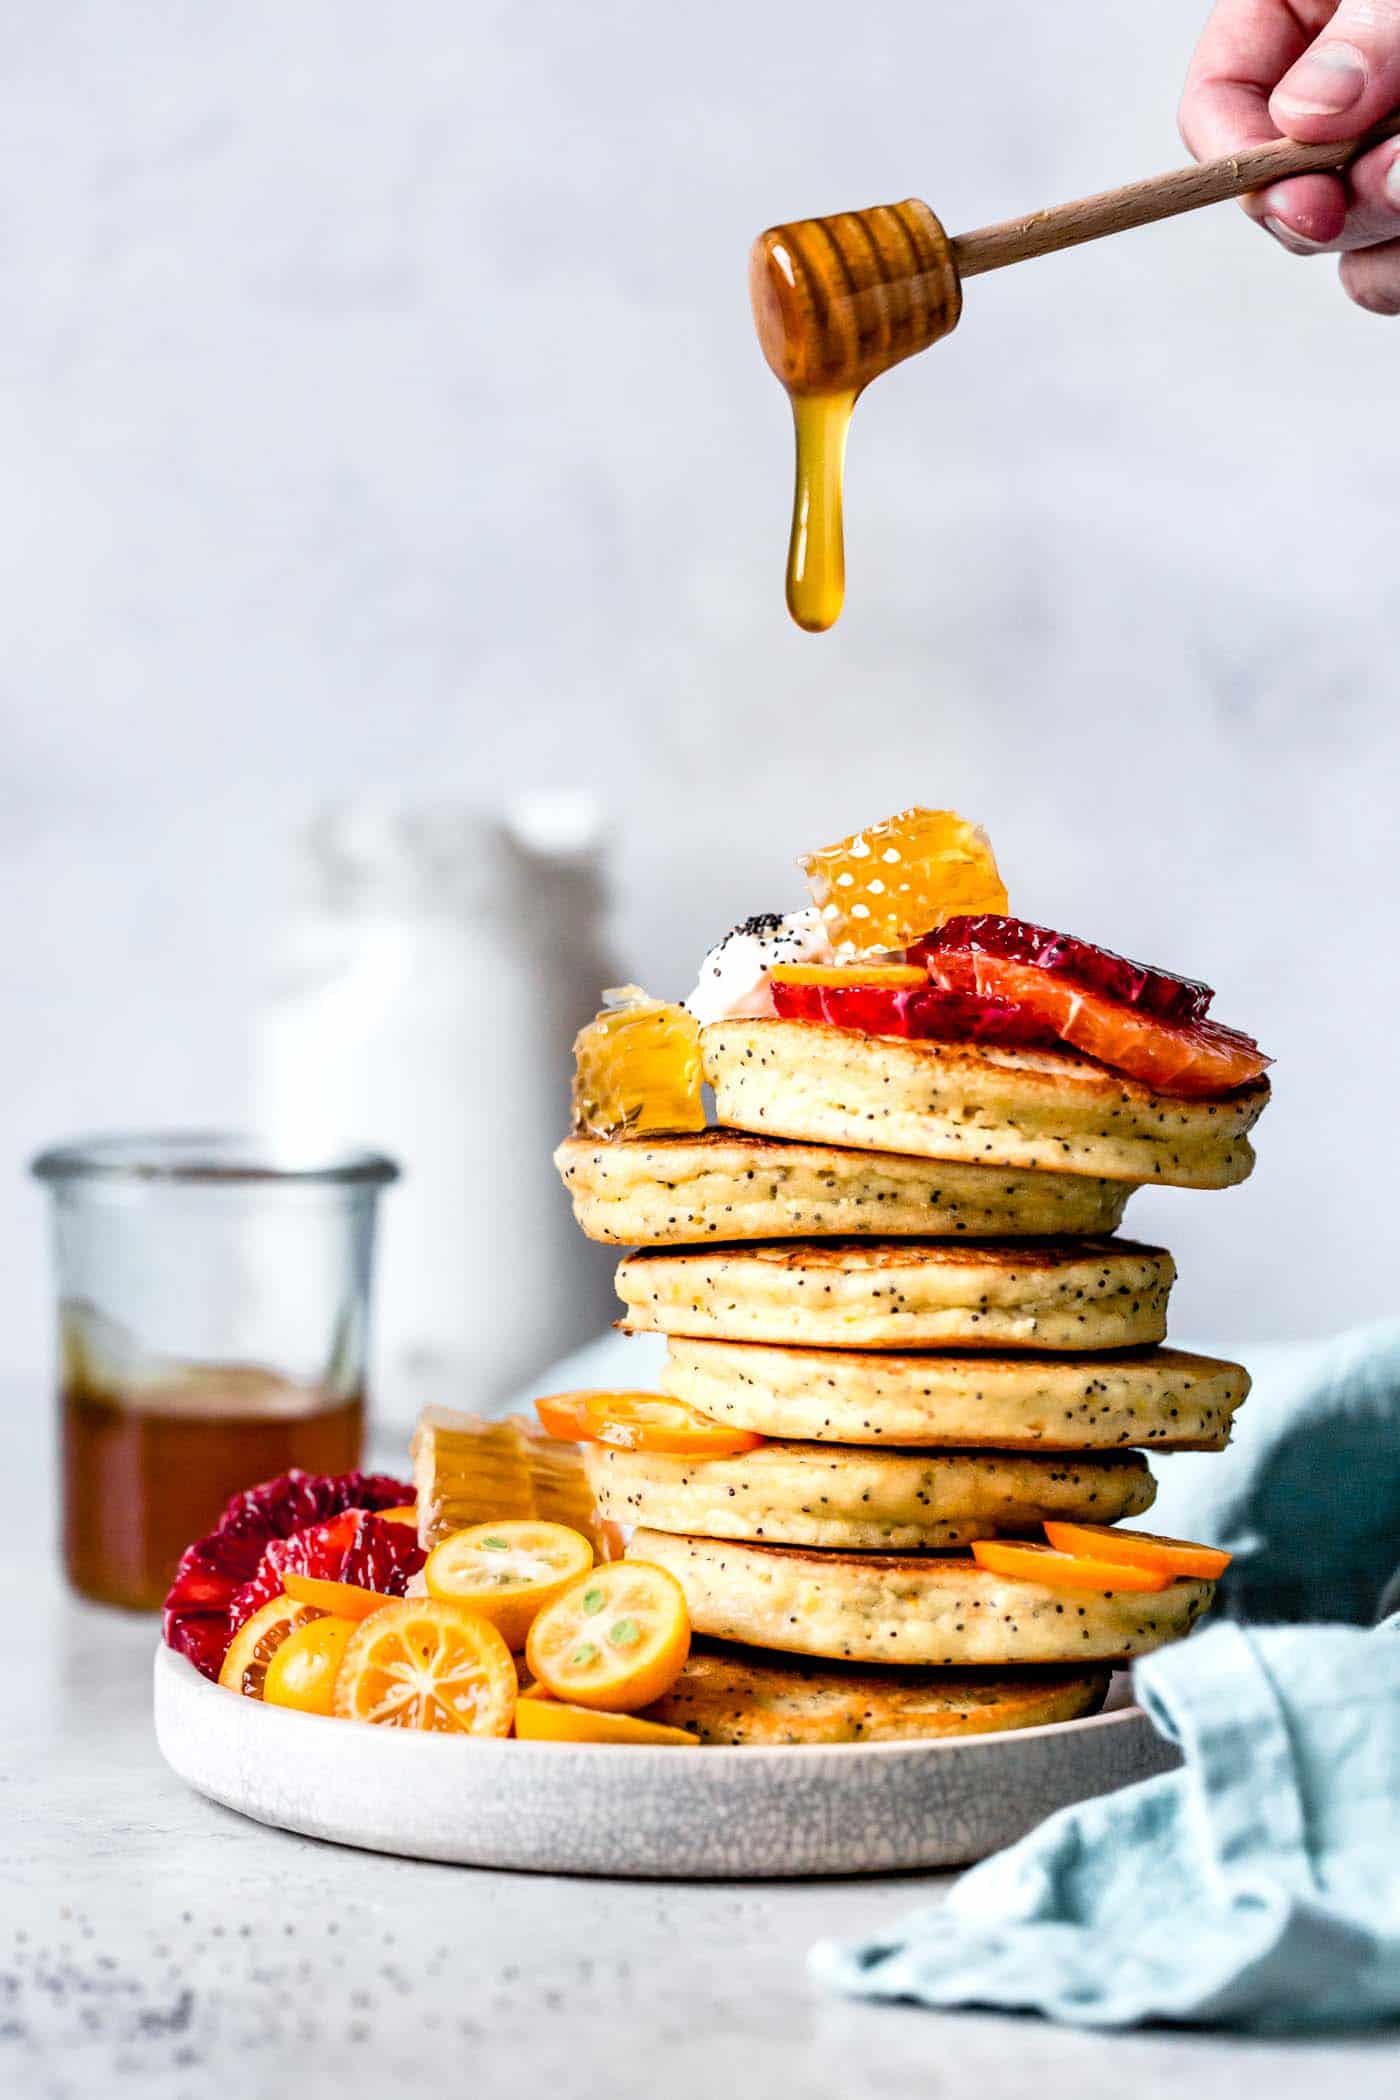 About to drizzle honey on a stack of grain-free pancakes